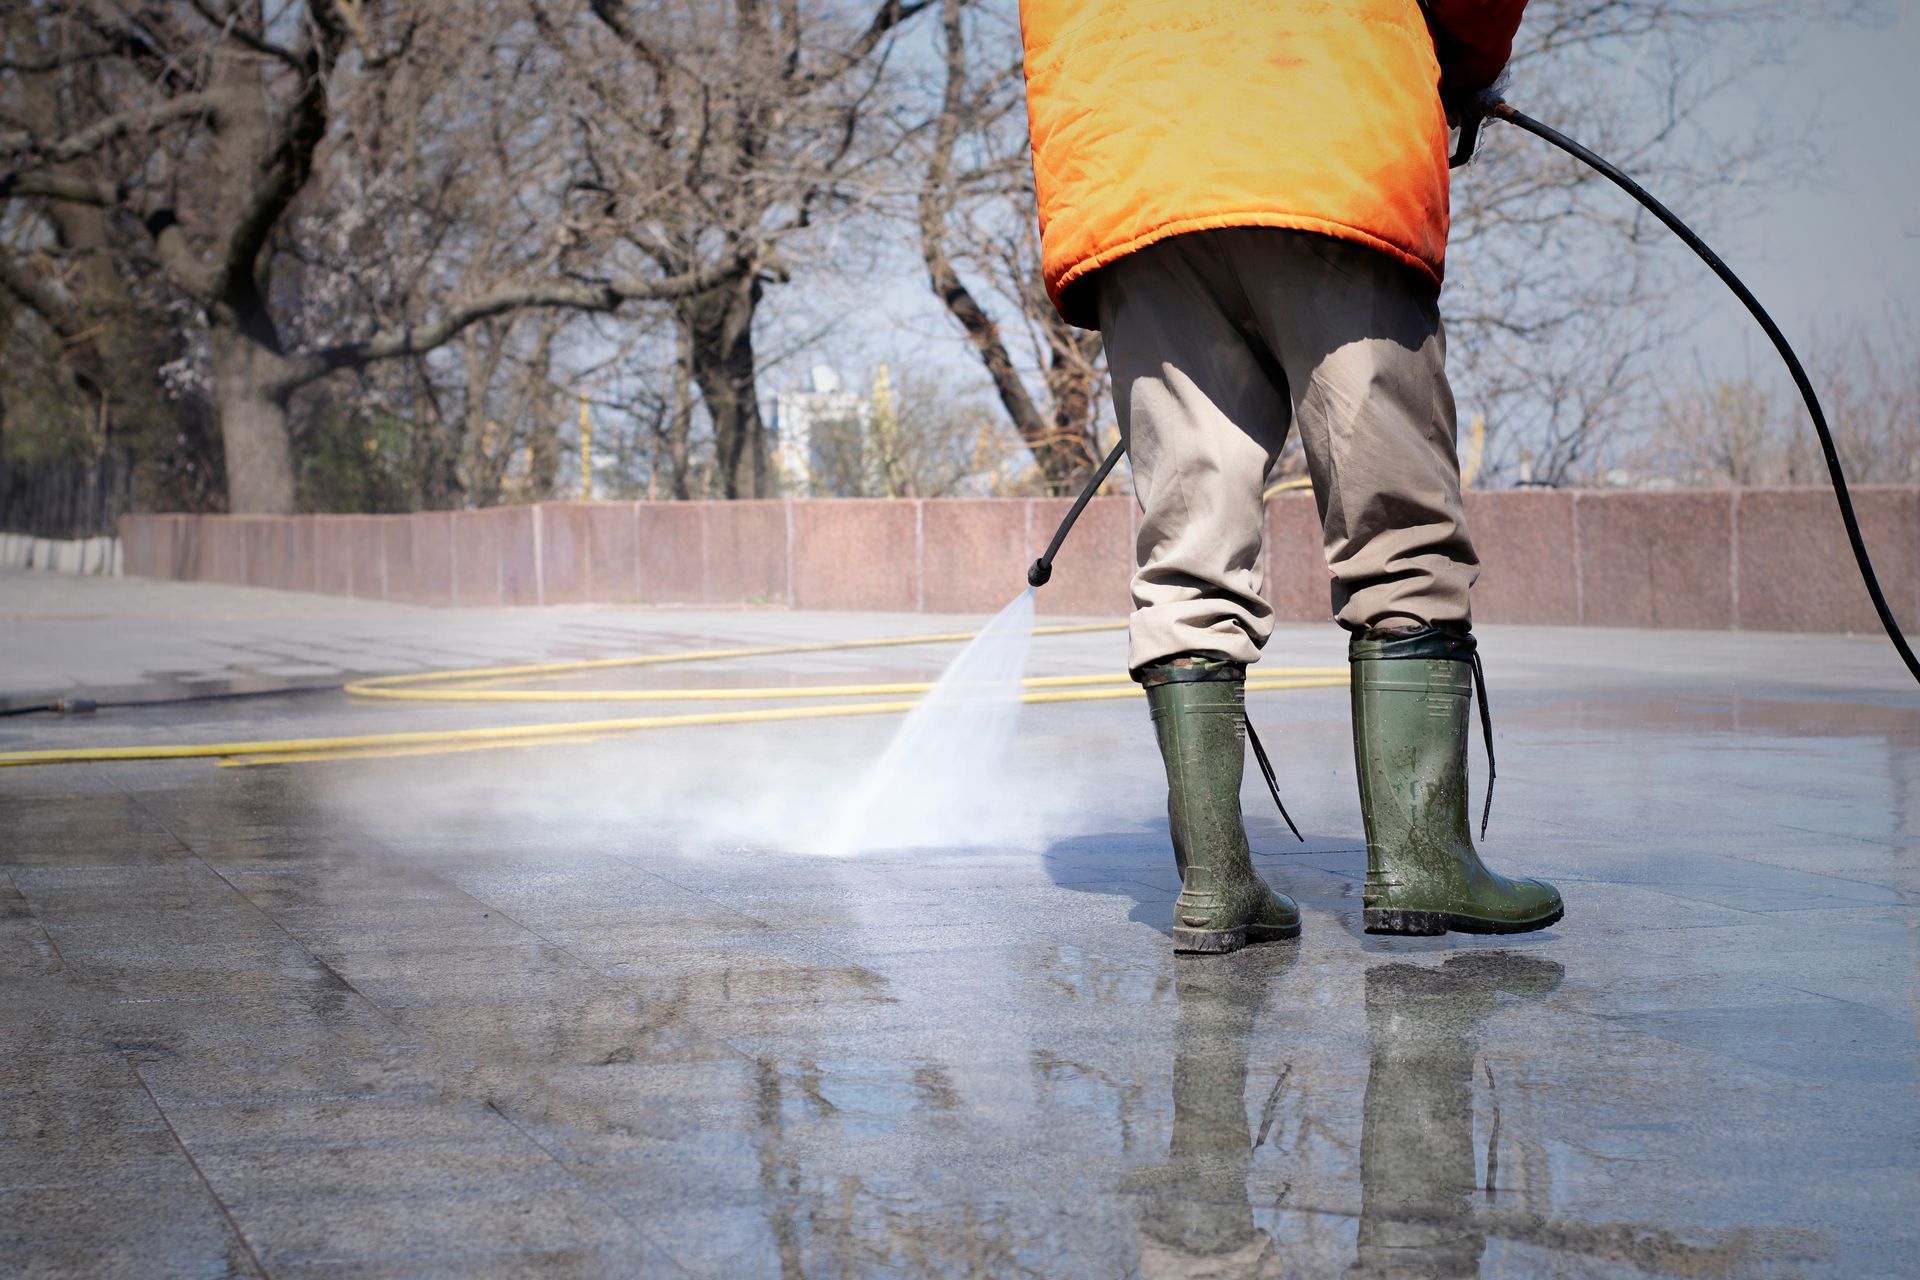 a man is using a high pressure washer to clean a concrete surface .